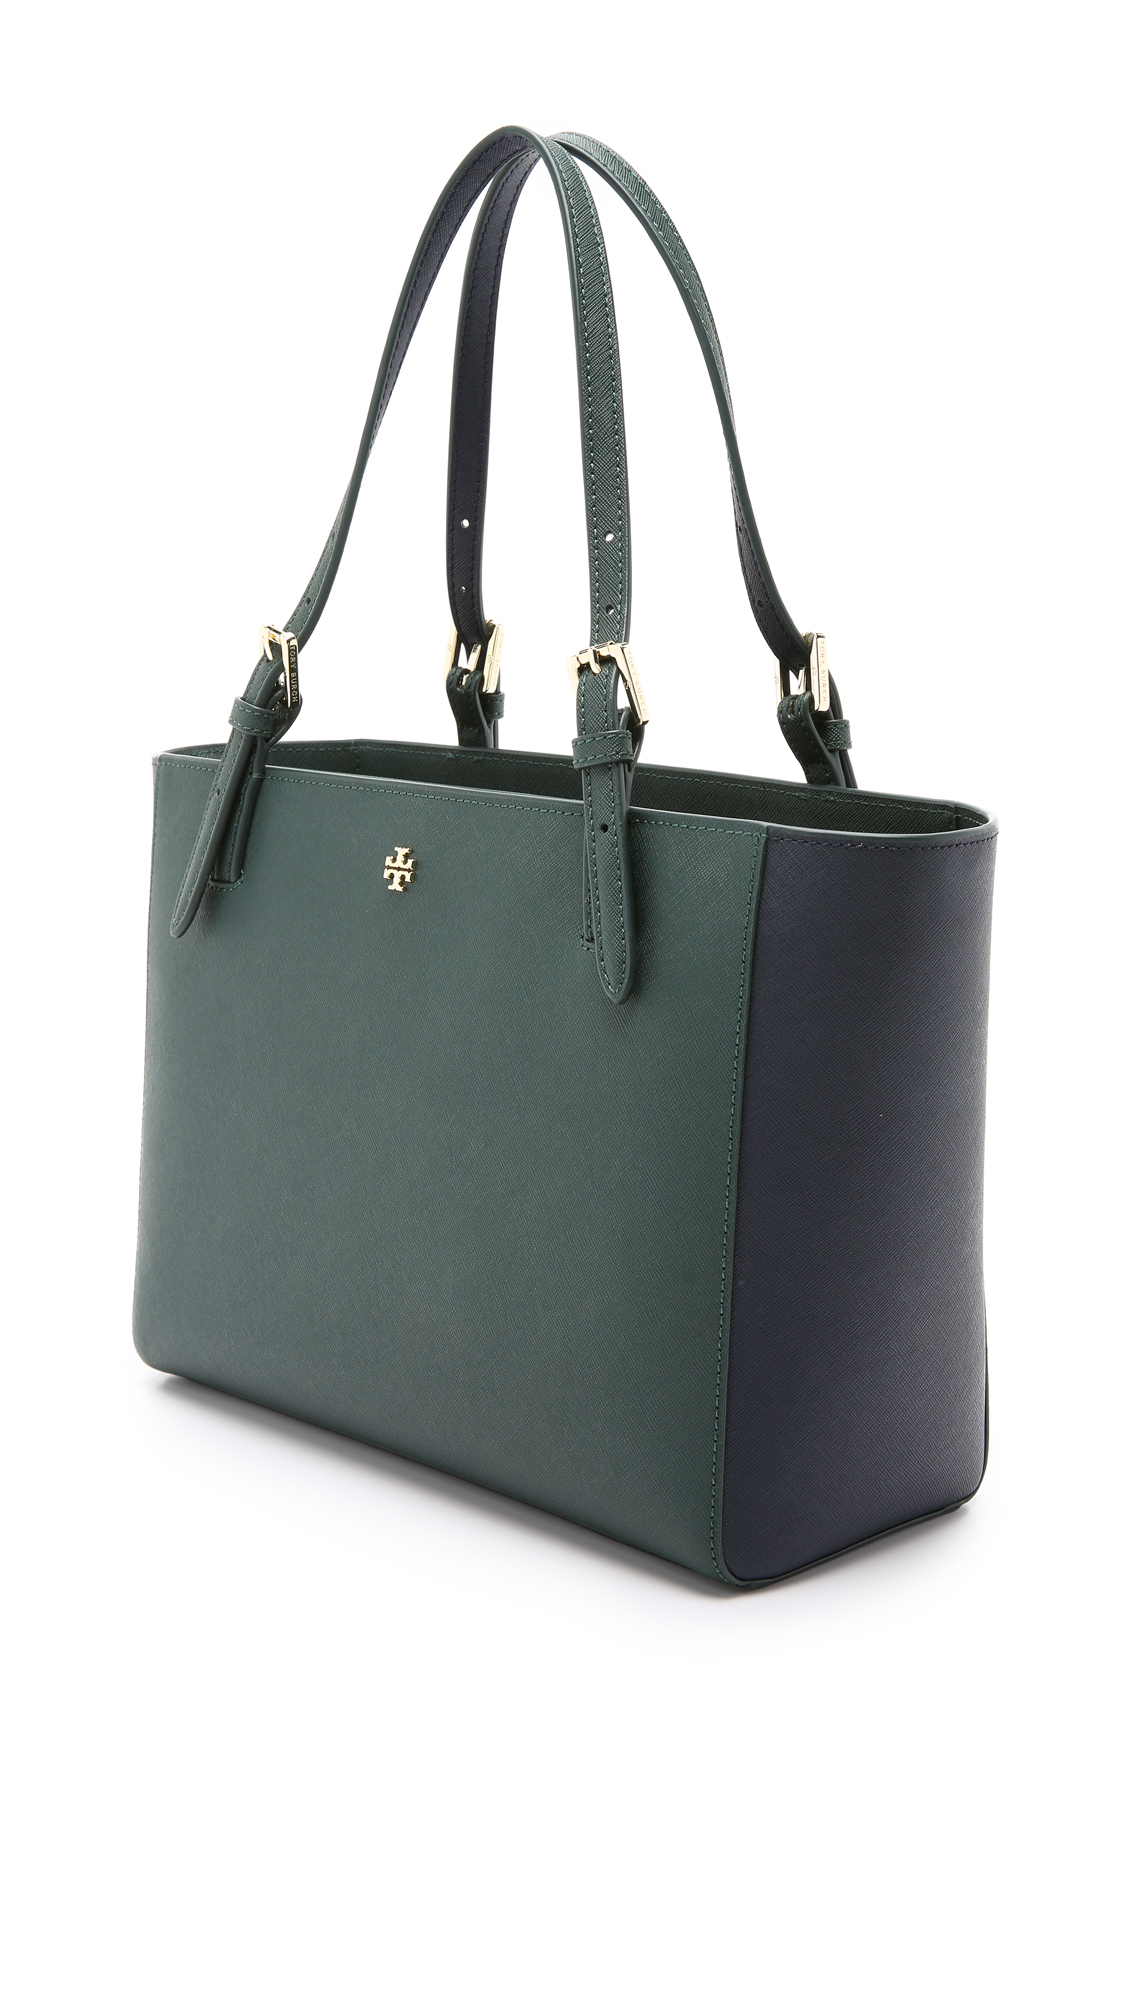 Tory Burch York Small Buckle Tote - Jitney Green/tory Navy | Lyst